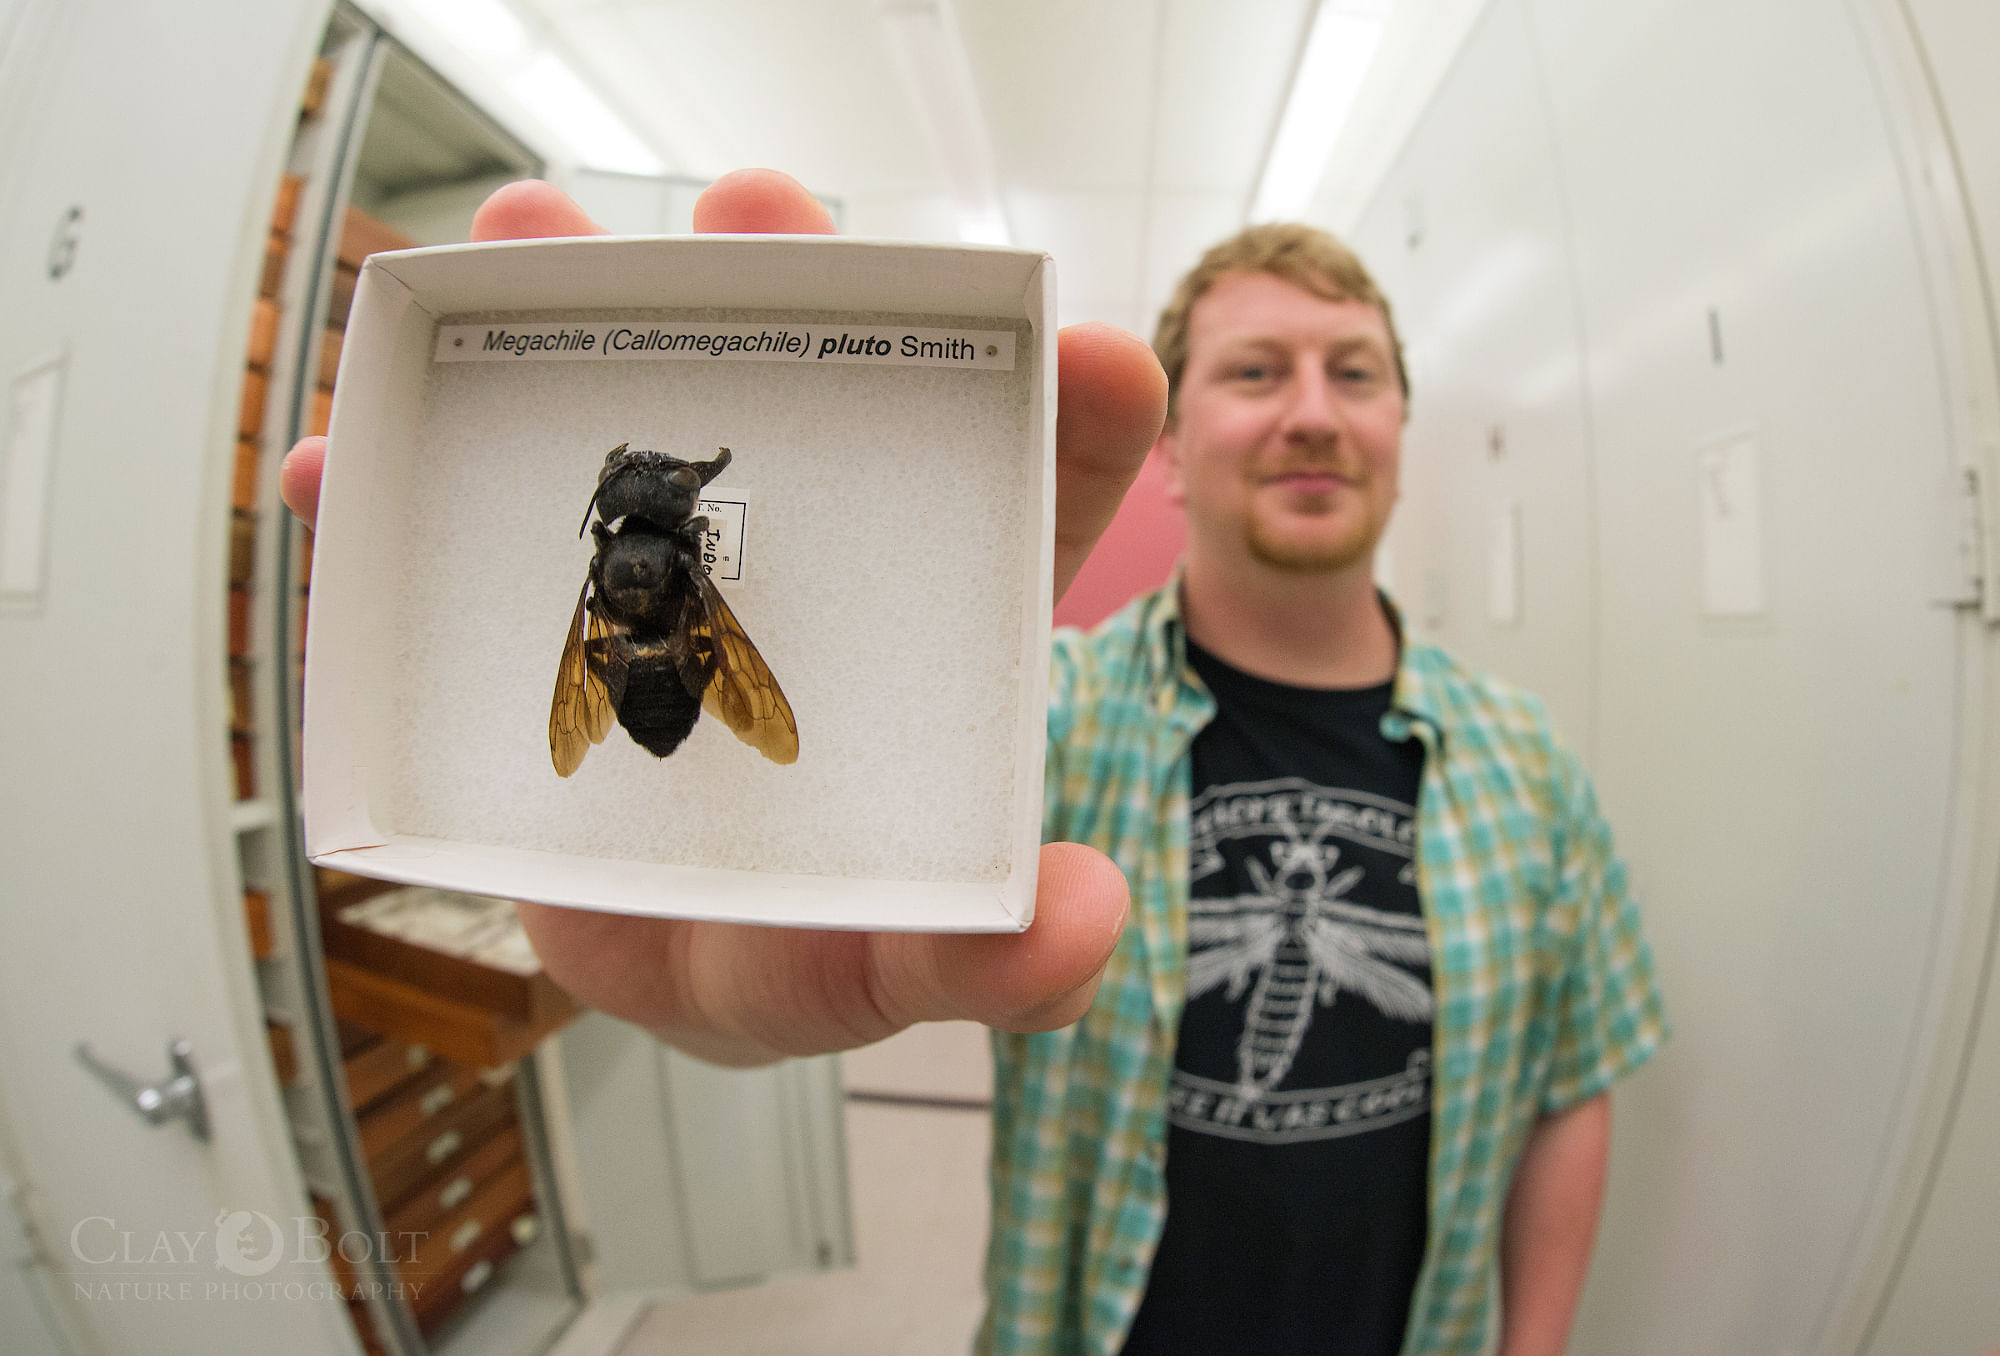 Bee expert Eli Wyman at the American Museum of Natural History with a specimen of Wallace’s Giant Bee © Clay Bolt / claybolt.com. 